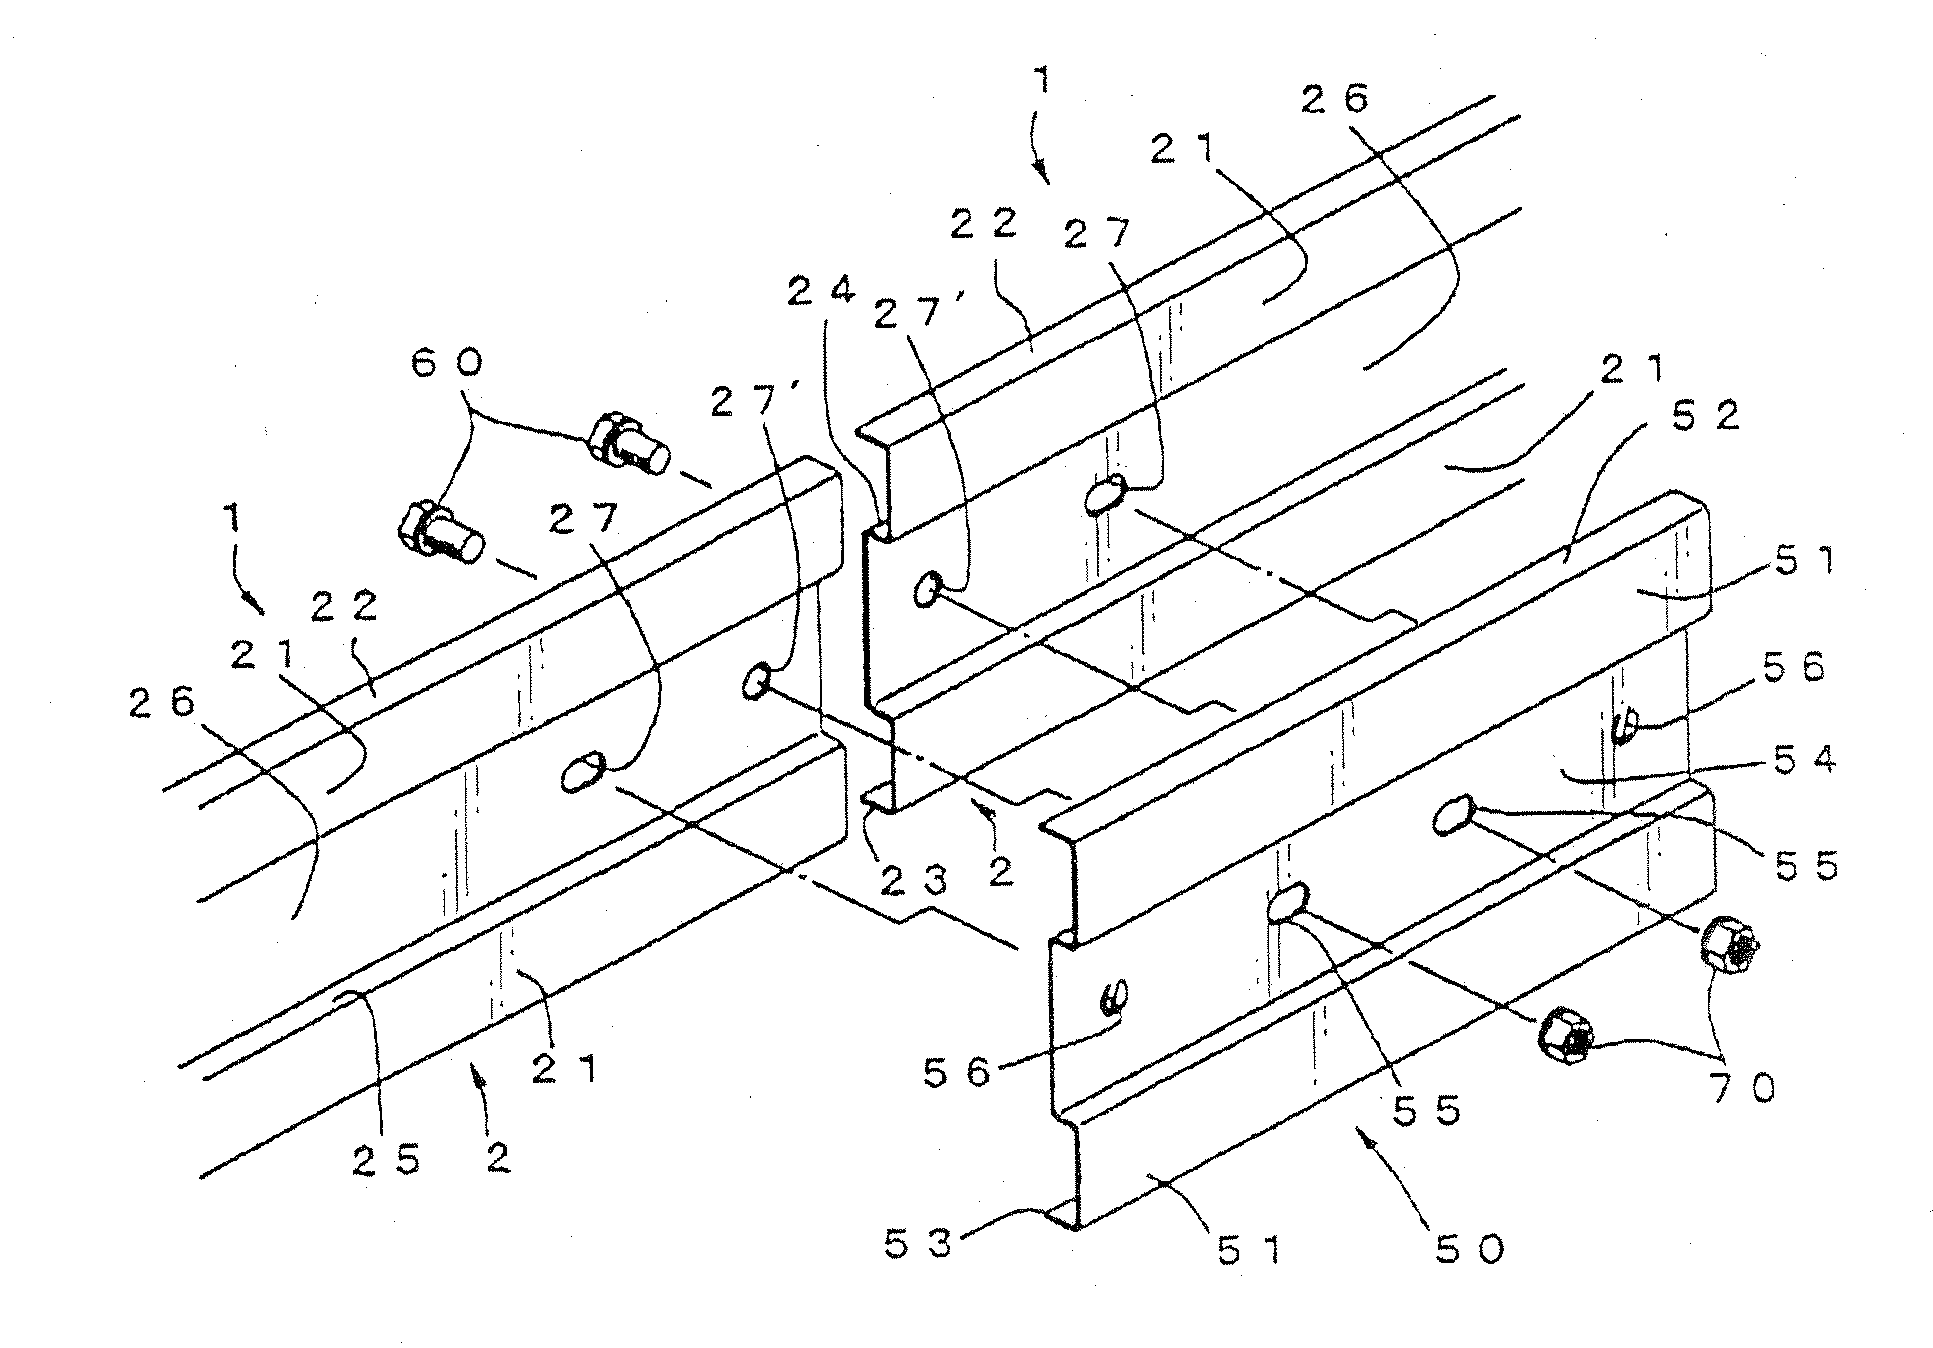 Method of joining cable racks, and a splice plate